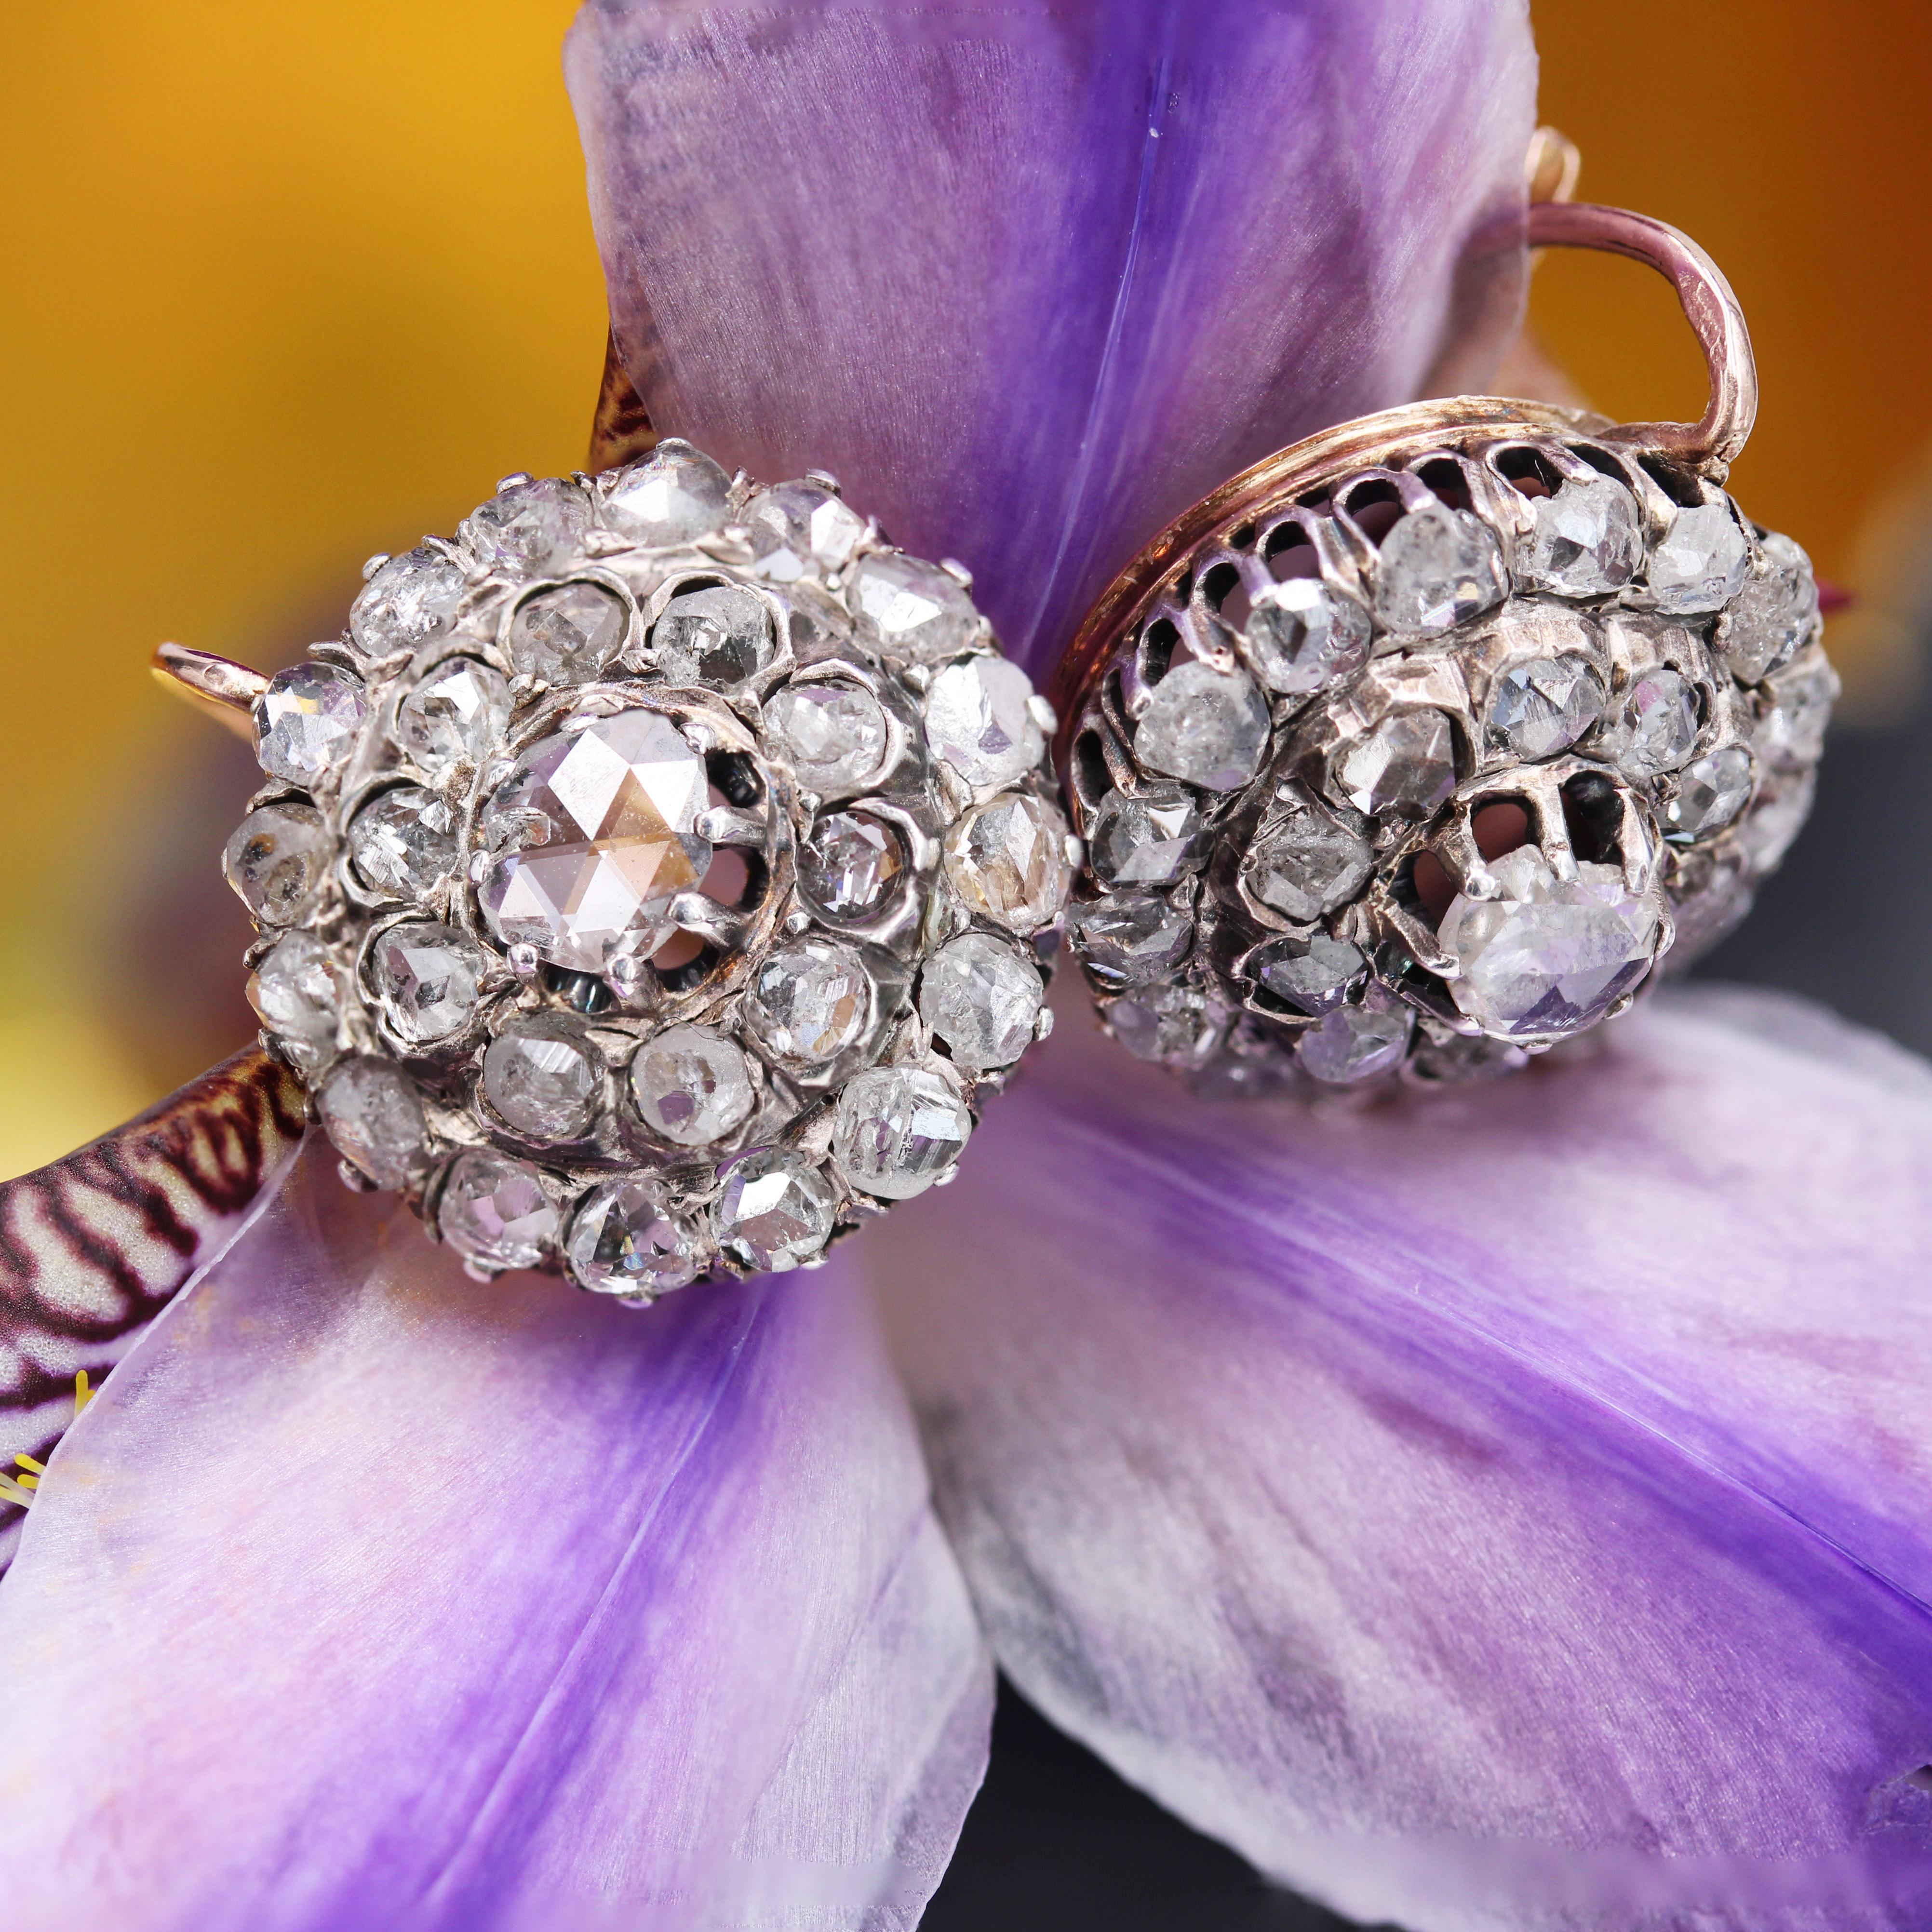 Napoleon III French 19th Century Diamonds 18 Karat Rose Gold Lever-Back Daisy Earrings For Sale